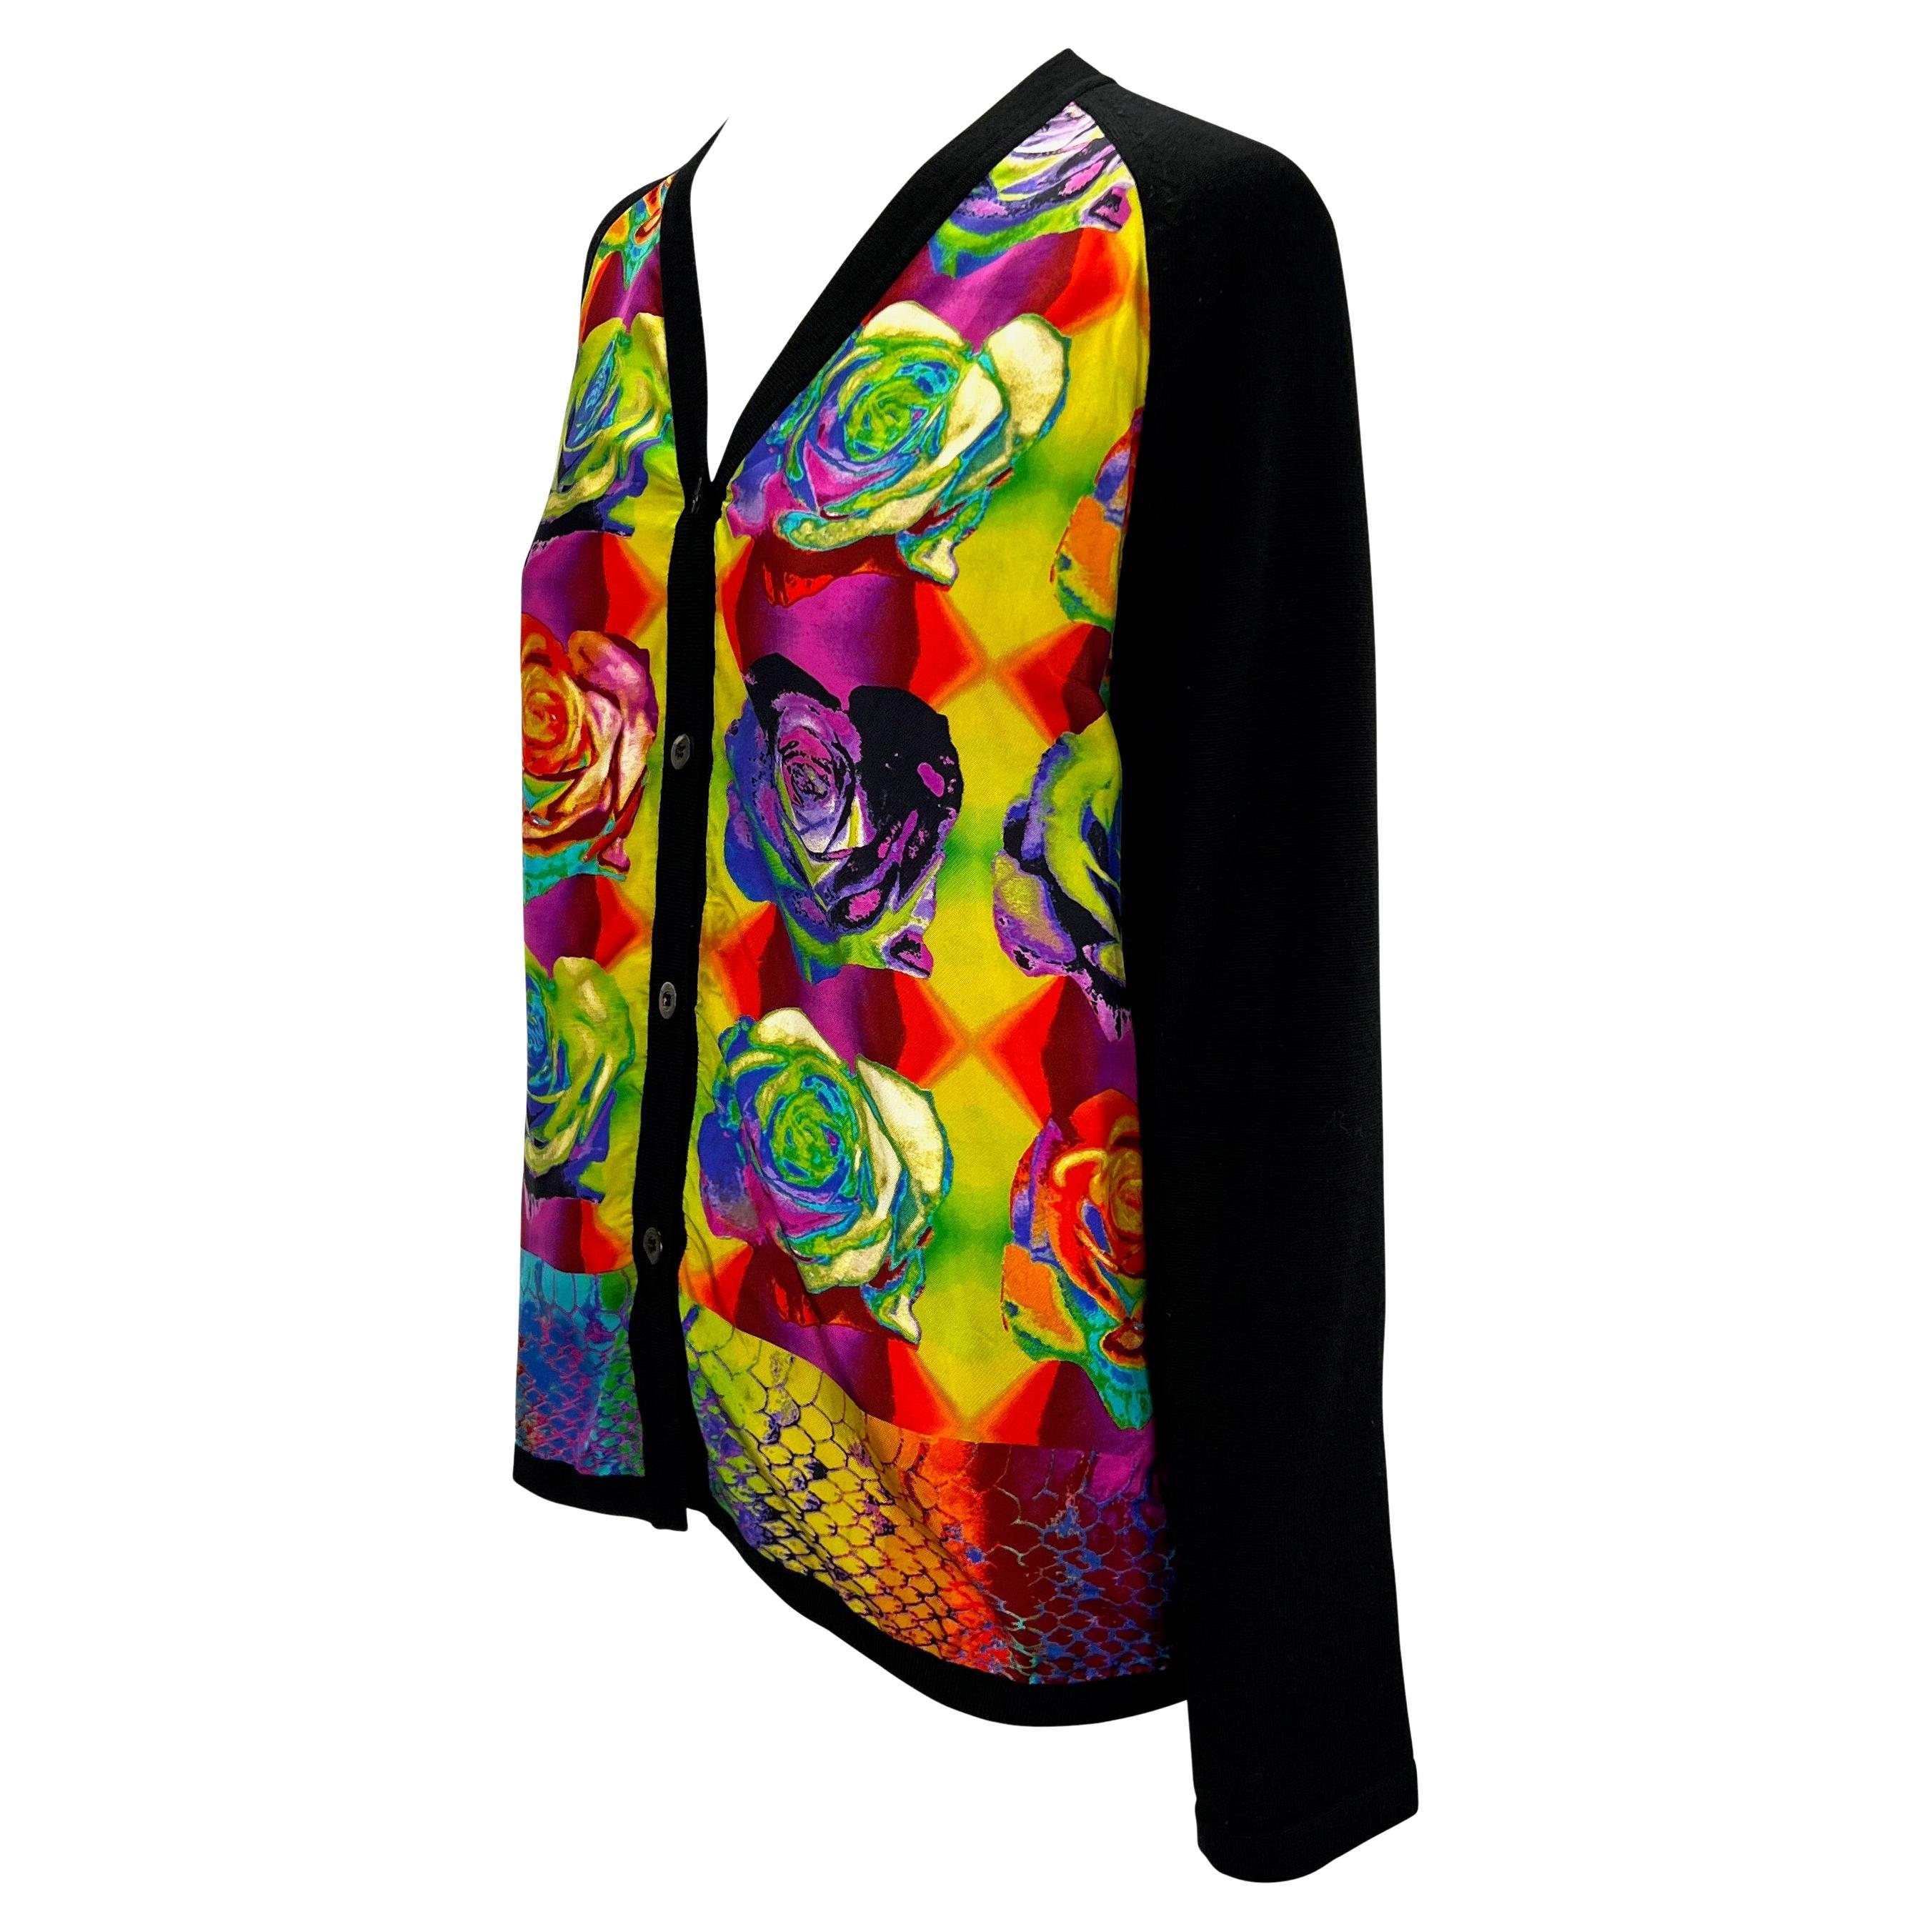 Presenting a floral print Gucci cardigan, designed by Tom Ford. From 1996, this black wool cardigan features a v-neckline and front button closure. The cardigan is made complete with silk panels at the front with a multi-color psychedelic rose